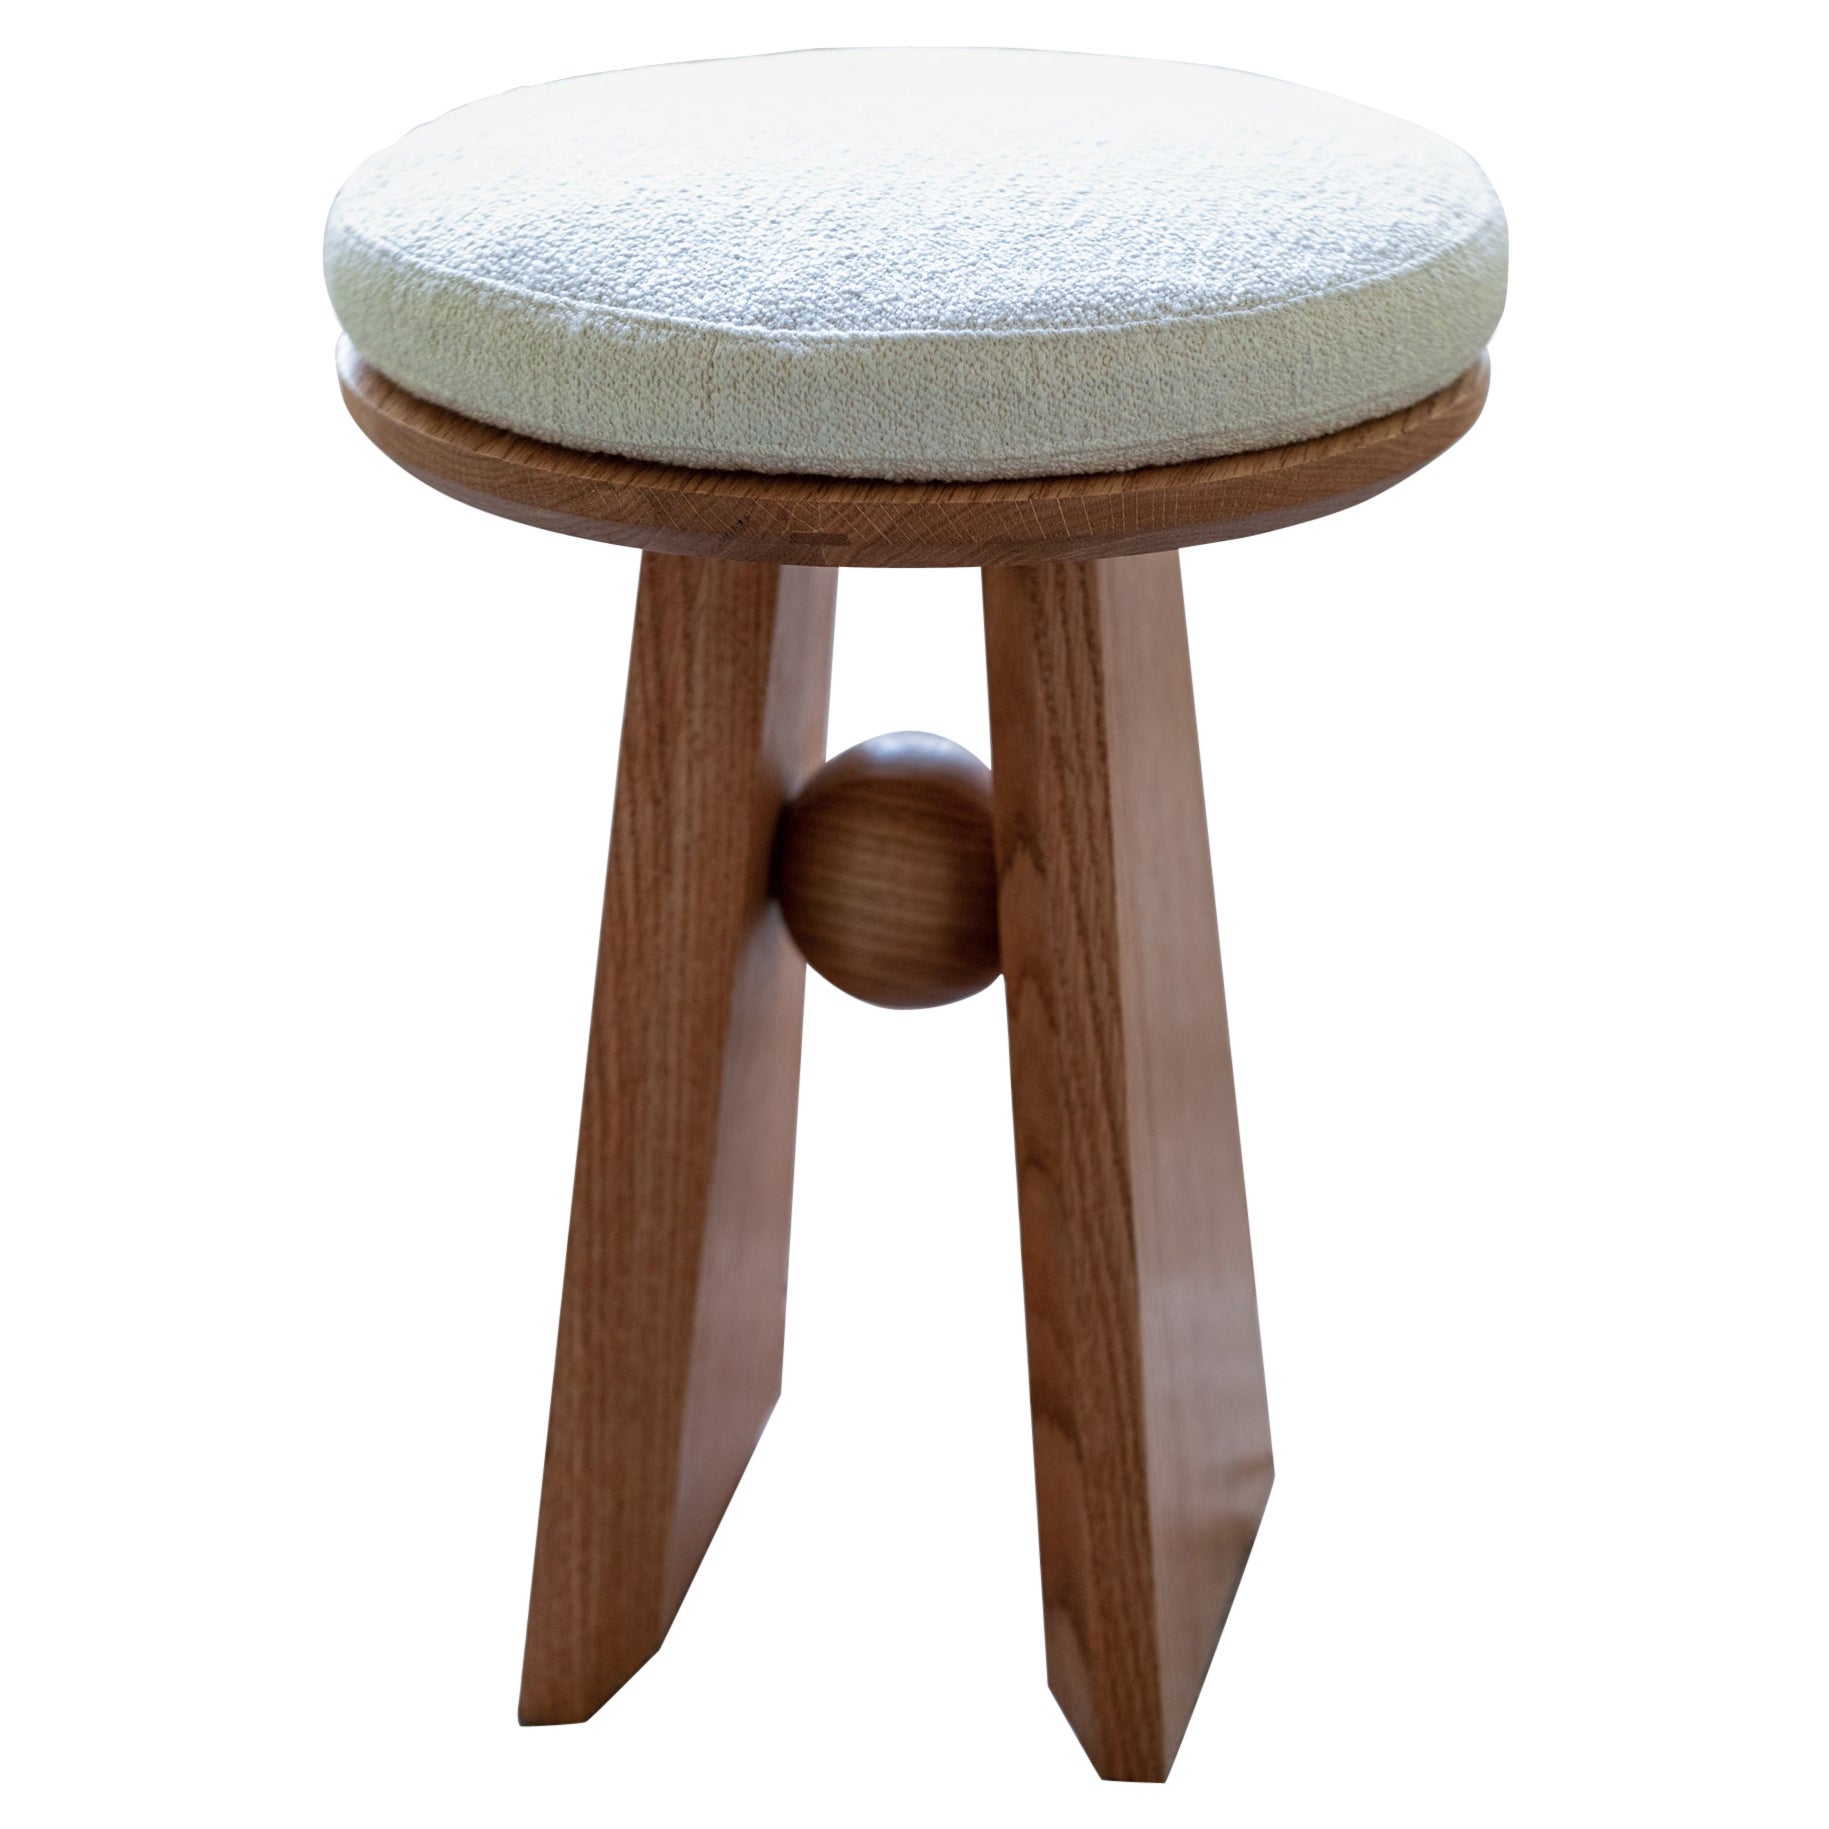 Basurto 01 Contemporary Wooden and Fabric Stool